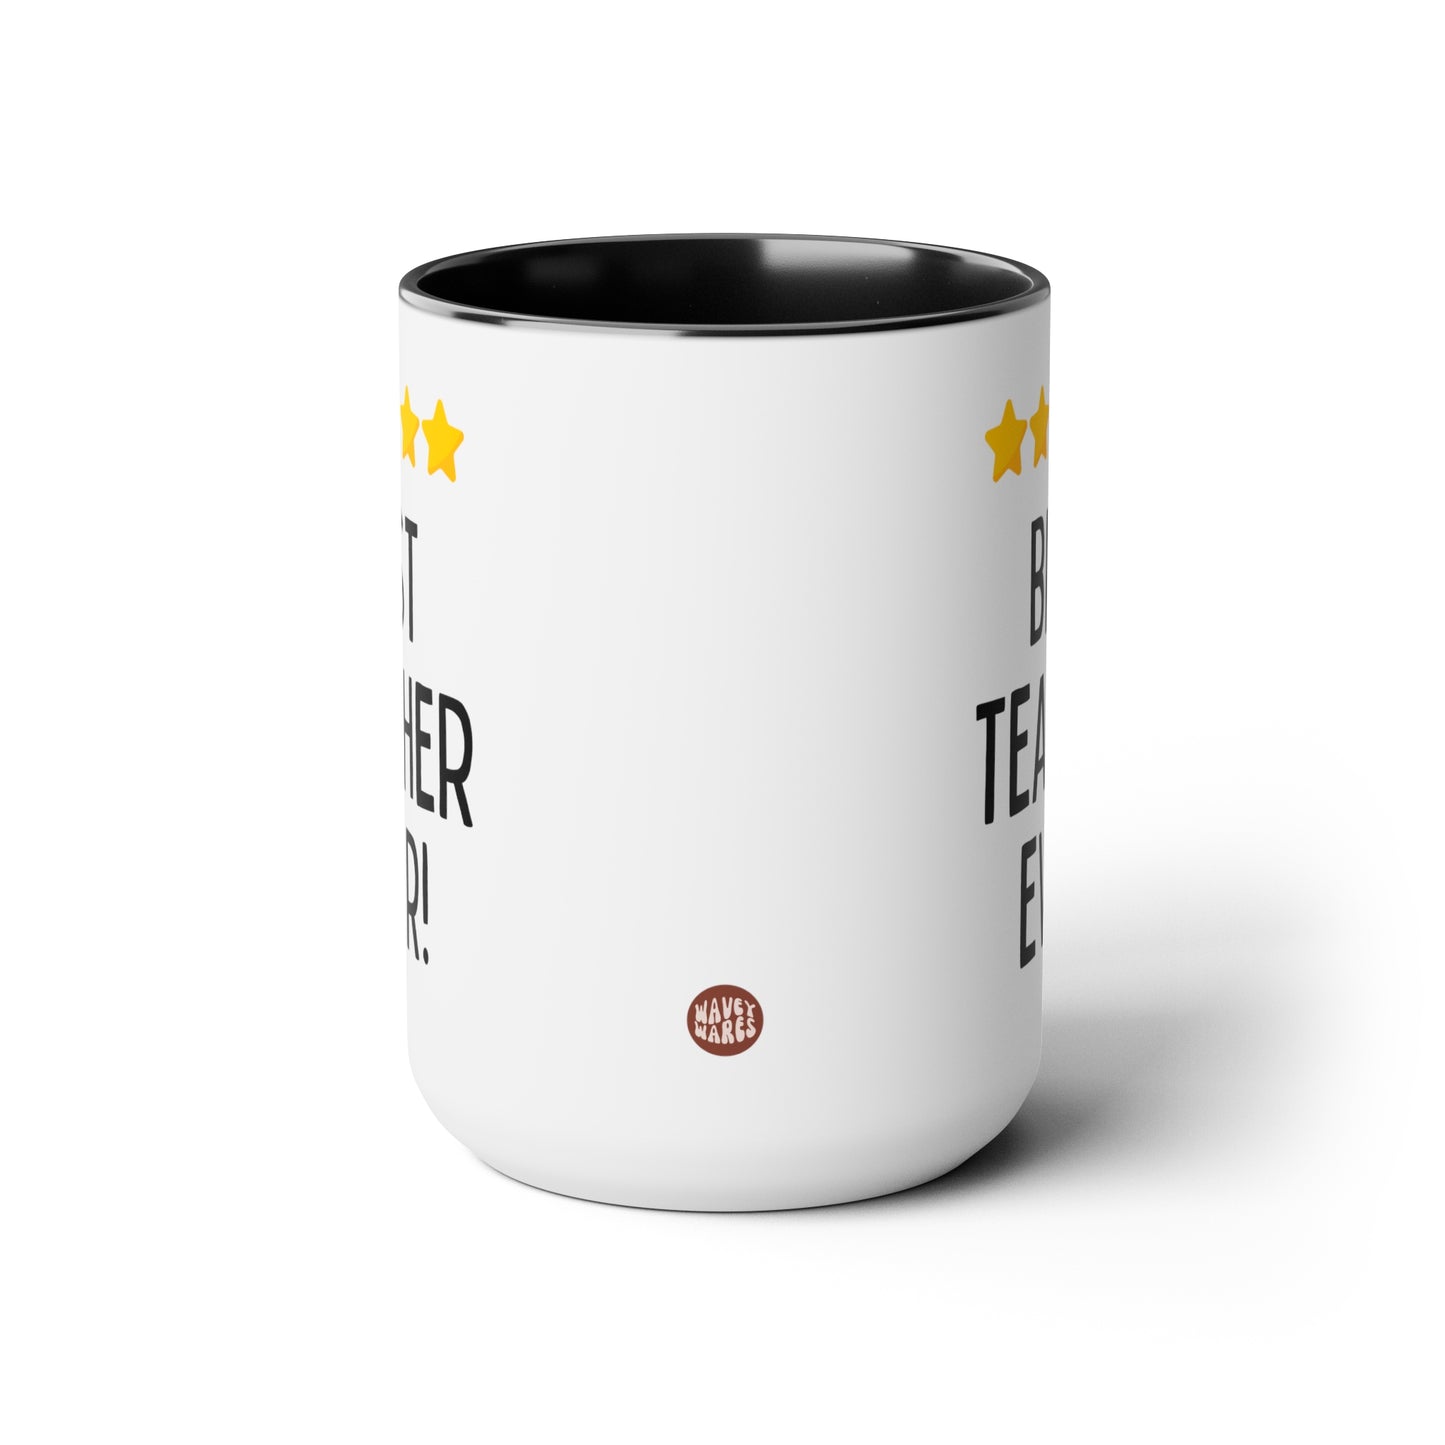 Best Teacher Ever 15oz white with black accent funny large coffee mug gift for educator teaching assistant end of the year present professor tutor five stars waveywares wavey wares wavywares wavy wares side